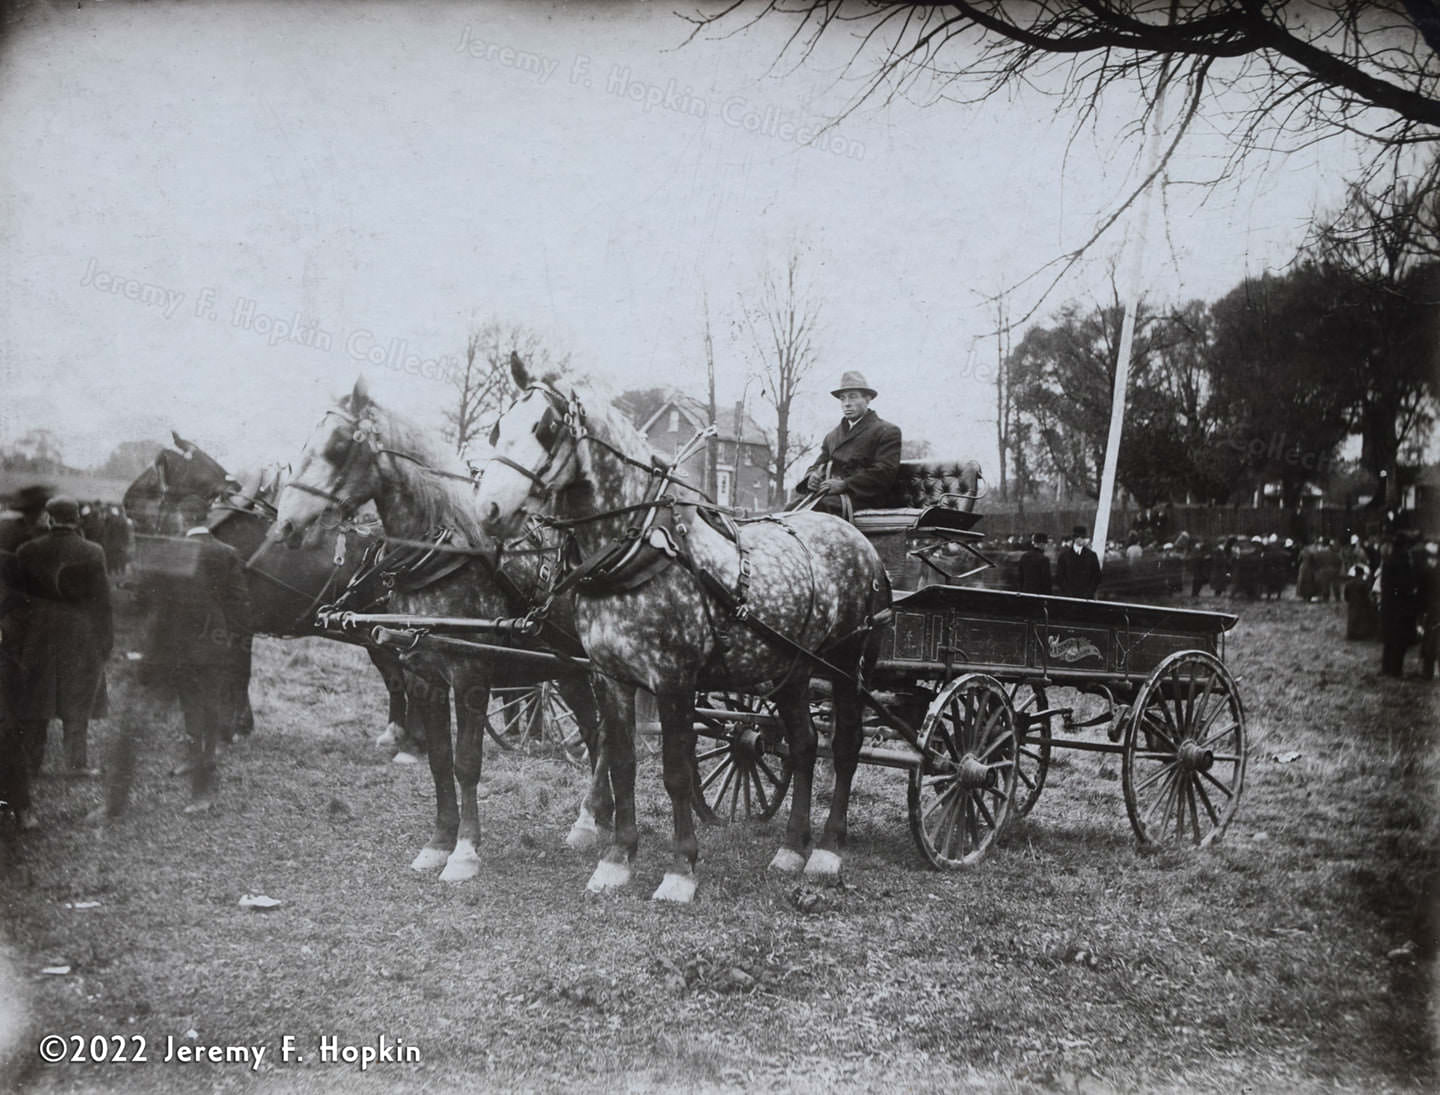 M.A. Ramsay of Downsview, Ontario with his horse team & wagon at what appears to be a large event in the 1900s.